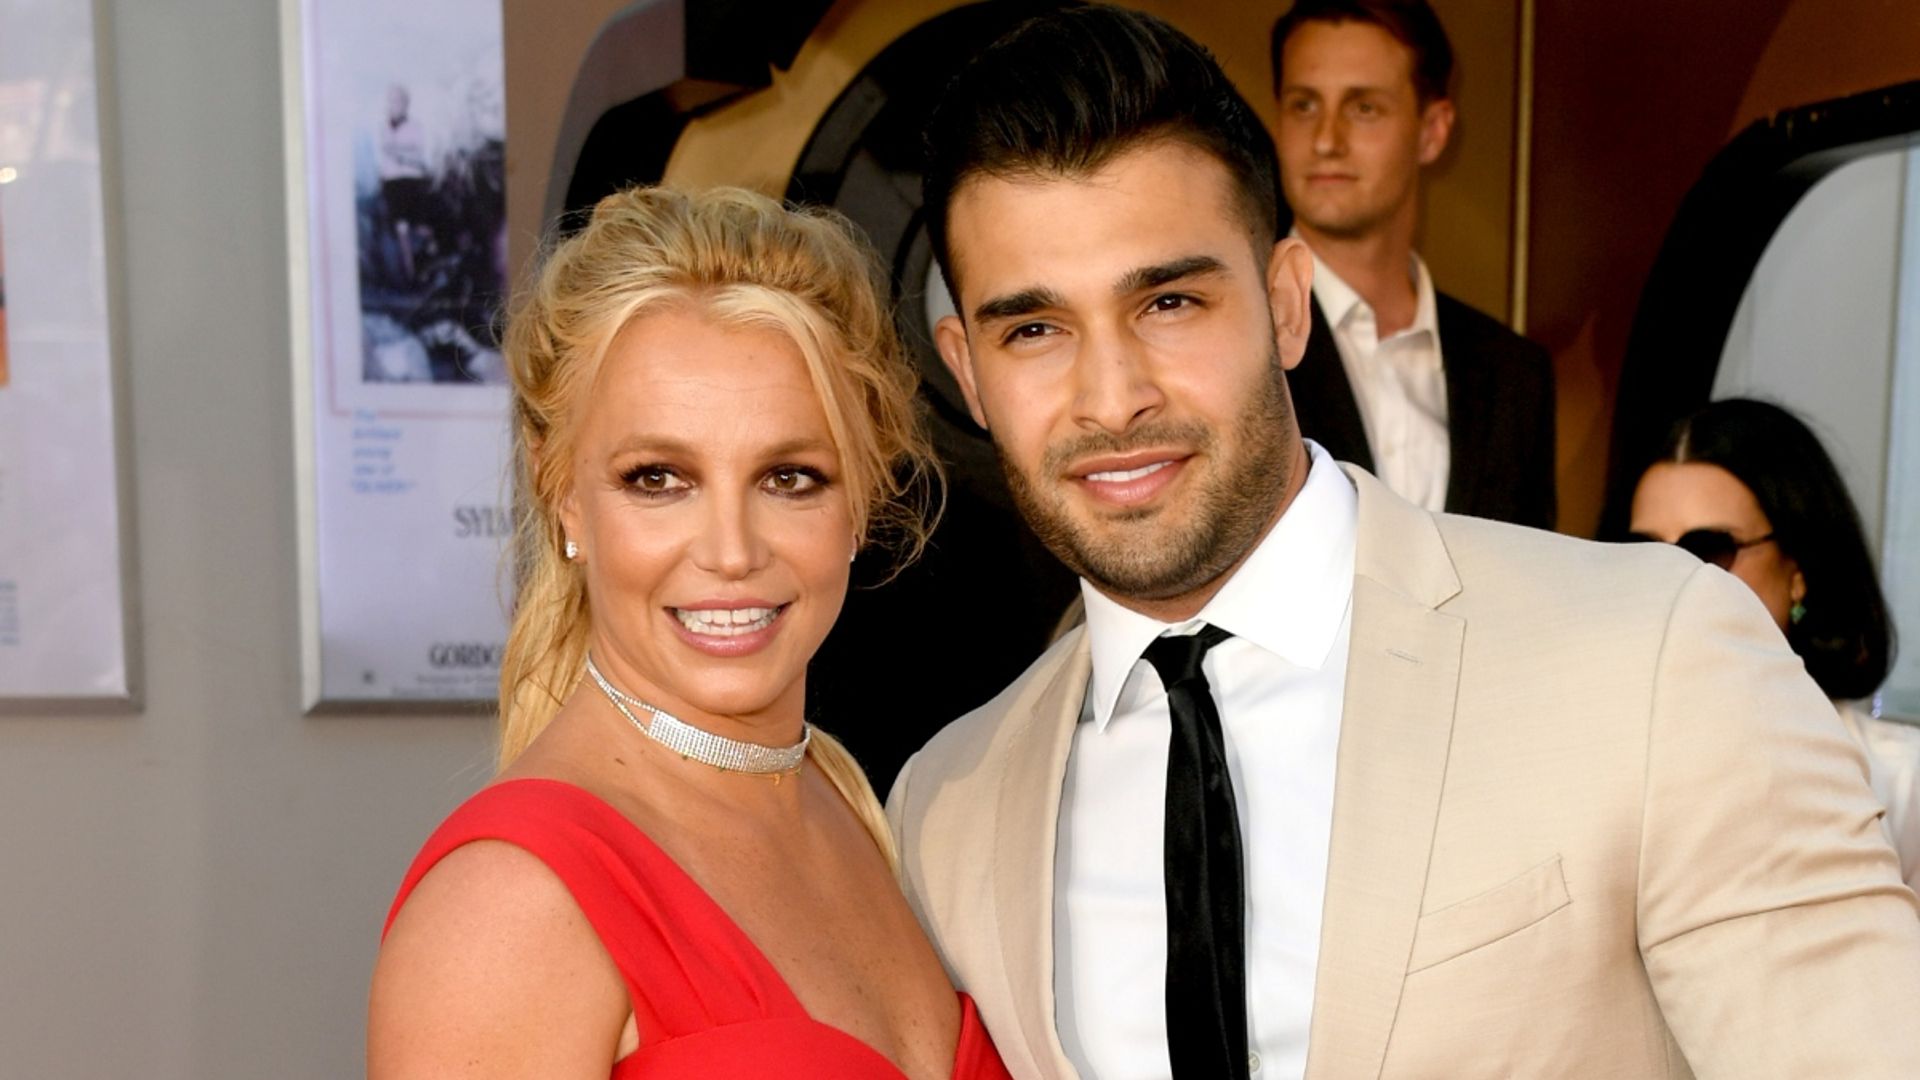 Britney Spears announces she is having a baby with fiancé Sam Asghari